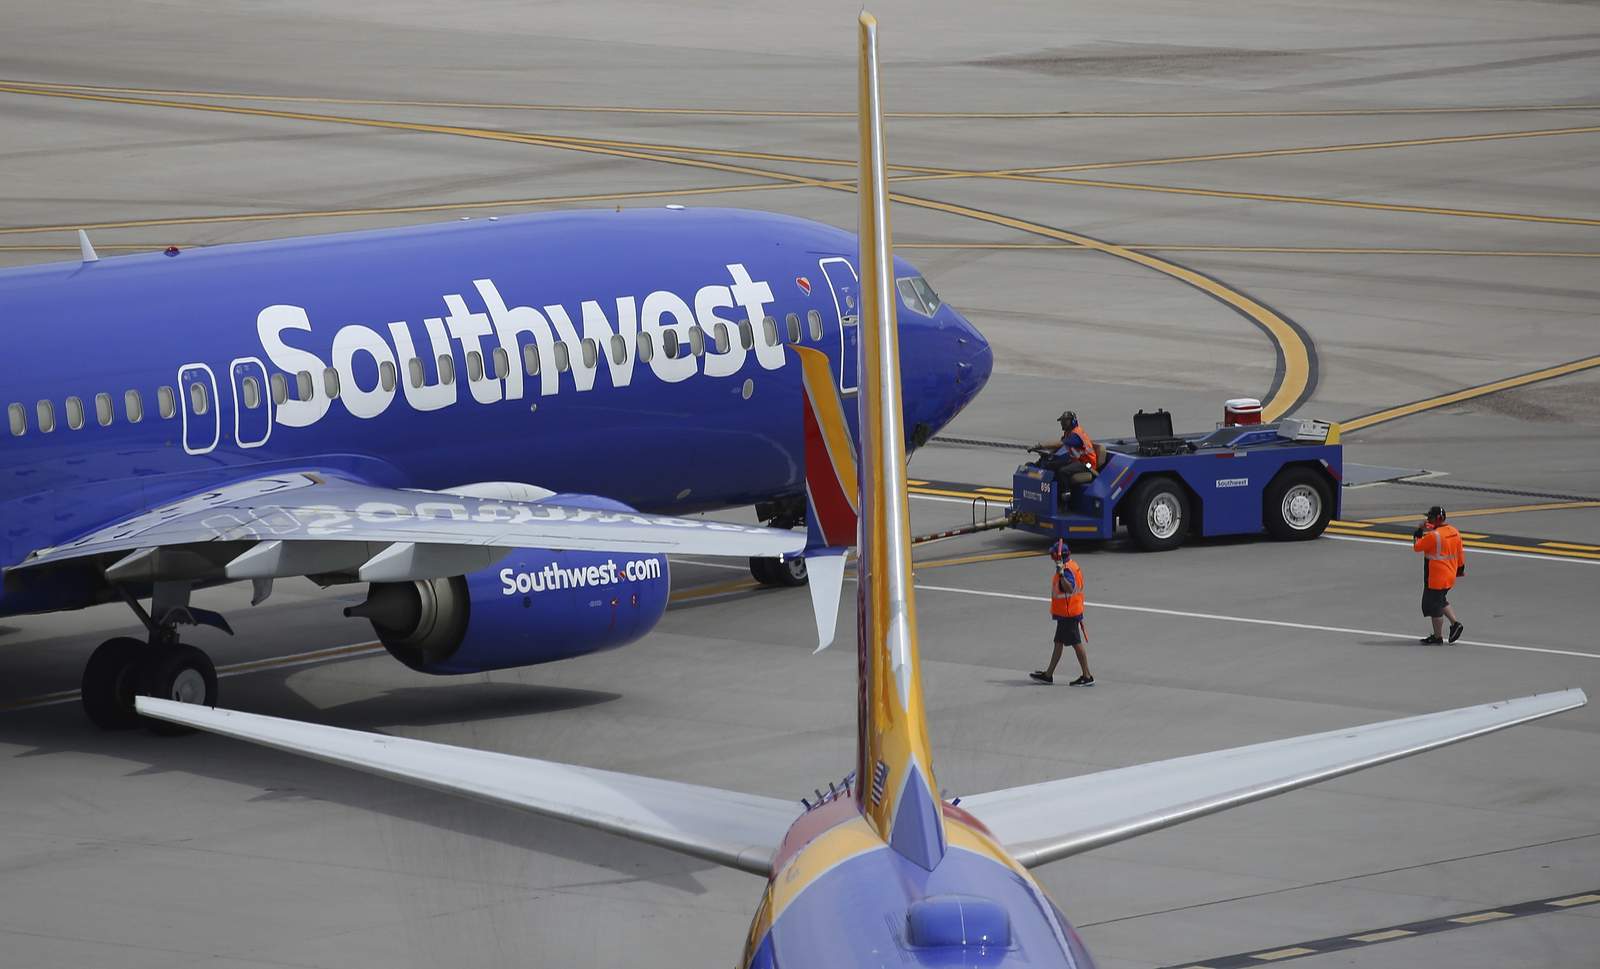 Southwest to soon fly out of IAH and Hobby, airport official says